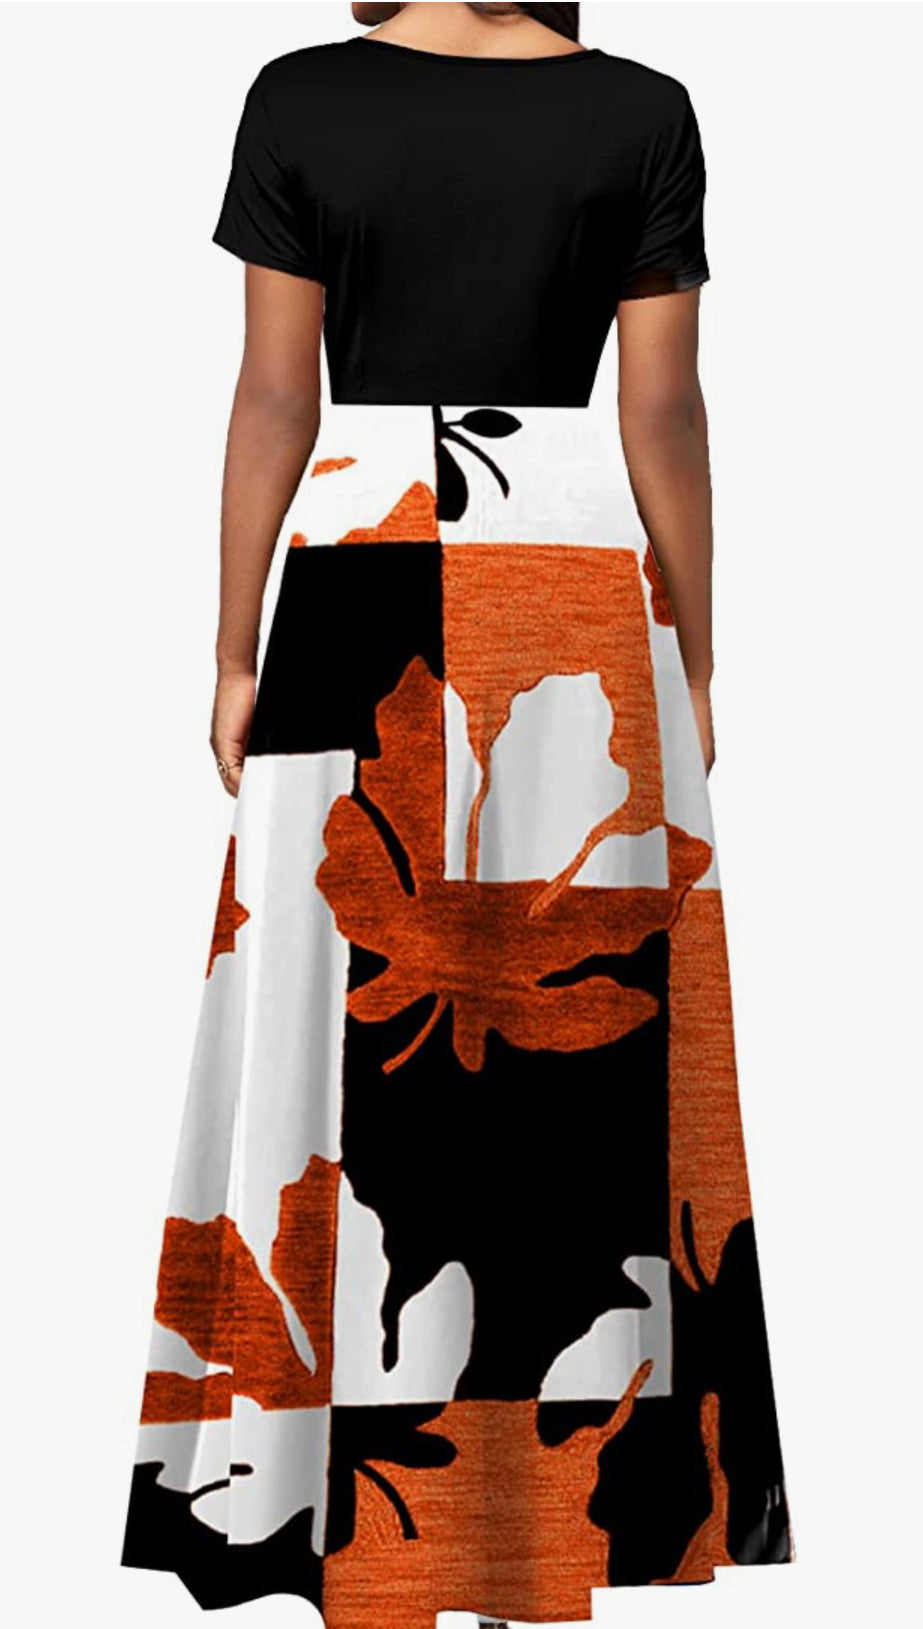 DISCONTINUED: Printed Full Length Maxi Dress, Sizes Small - 3XLarge